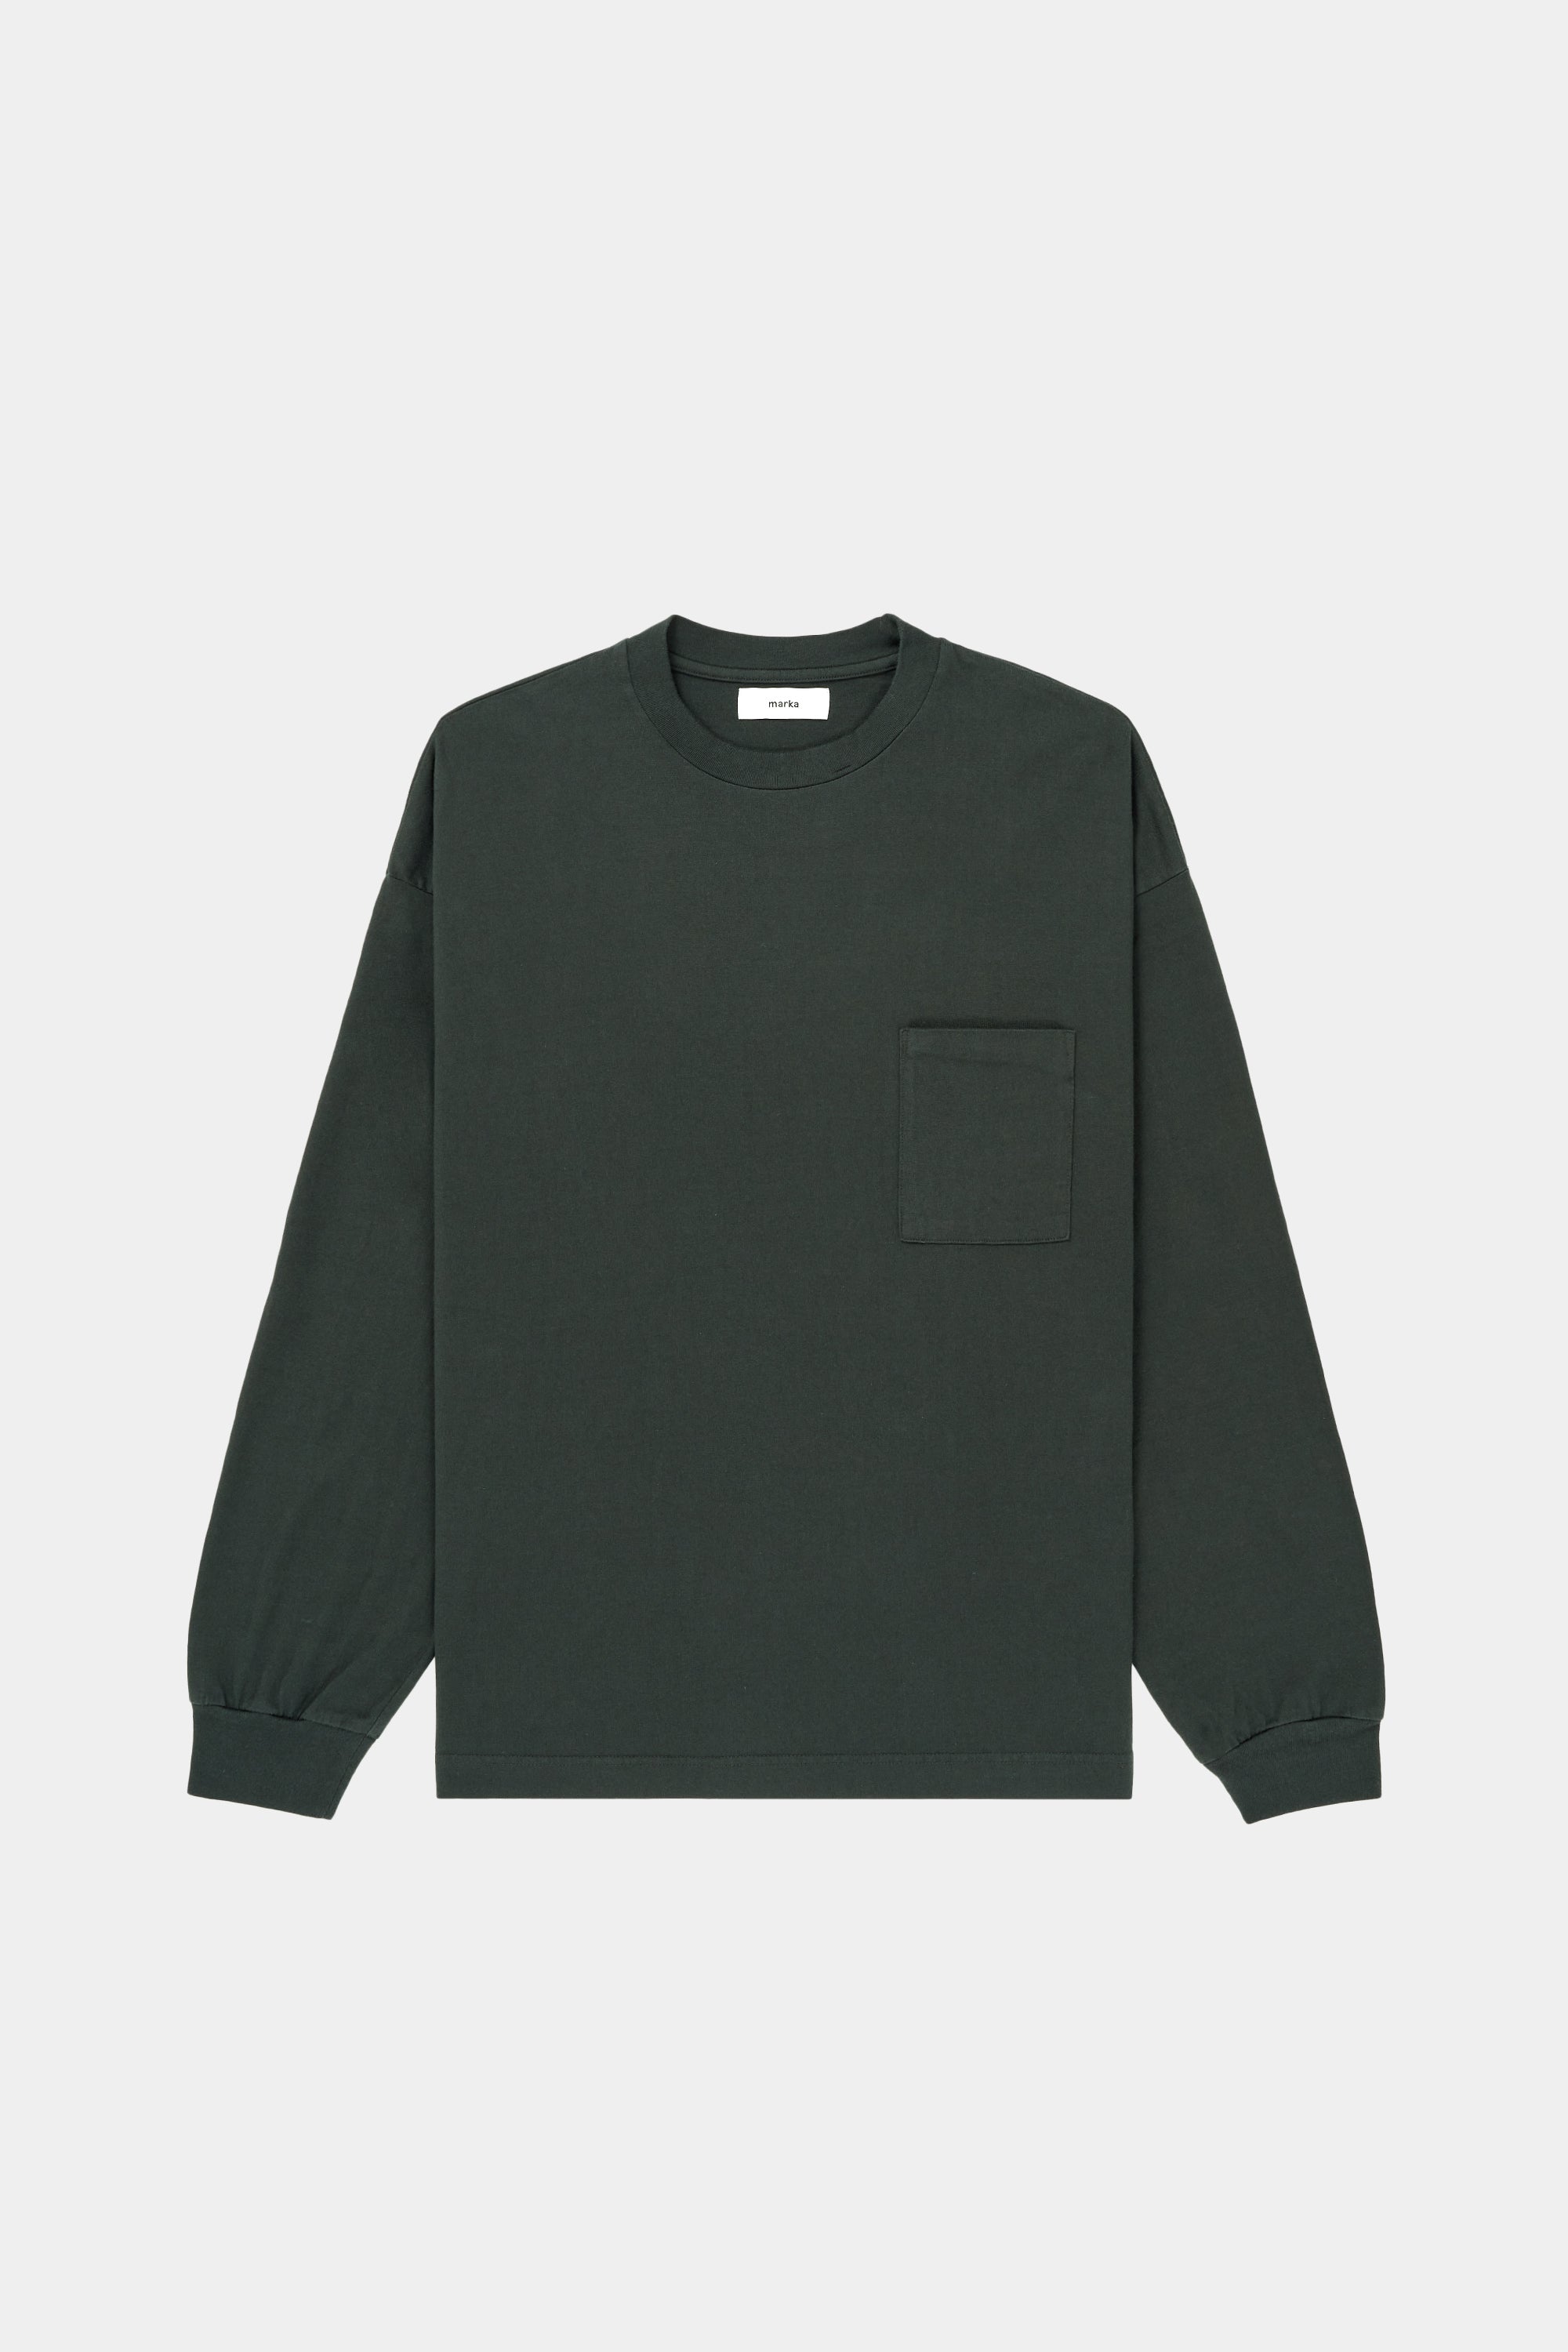 40/2 Combed Knit Pocket Tee L/s, Green